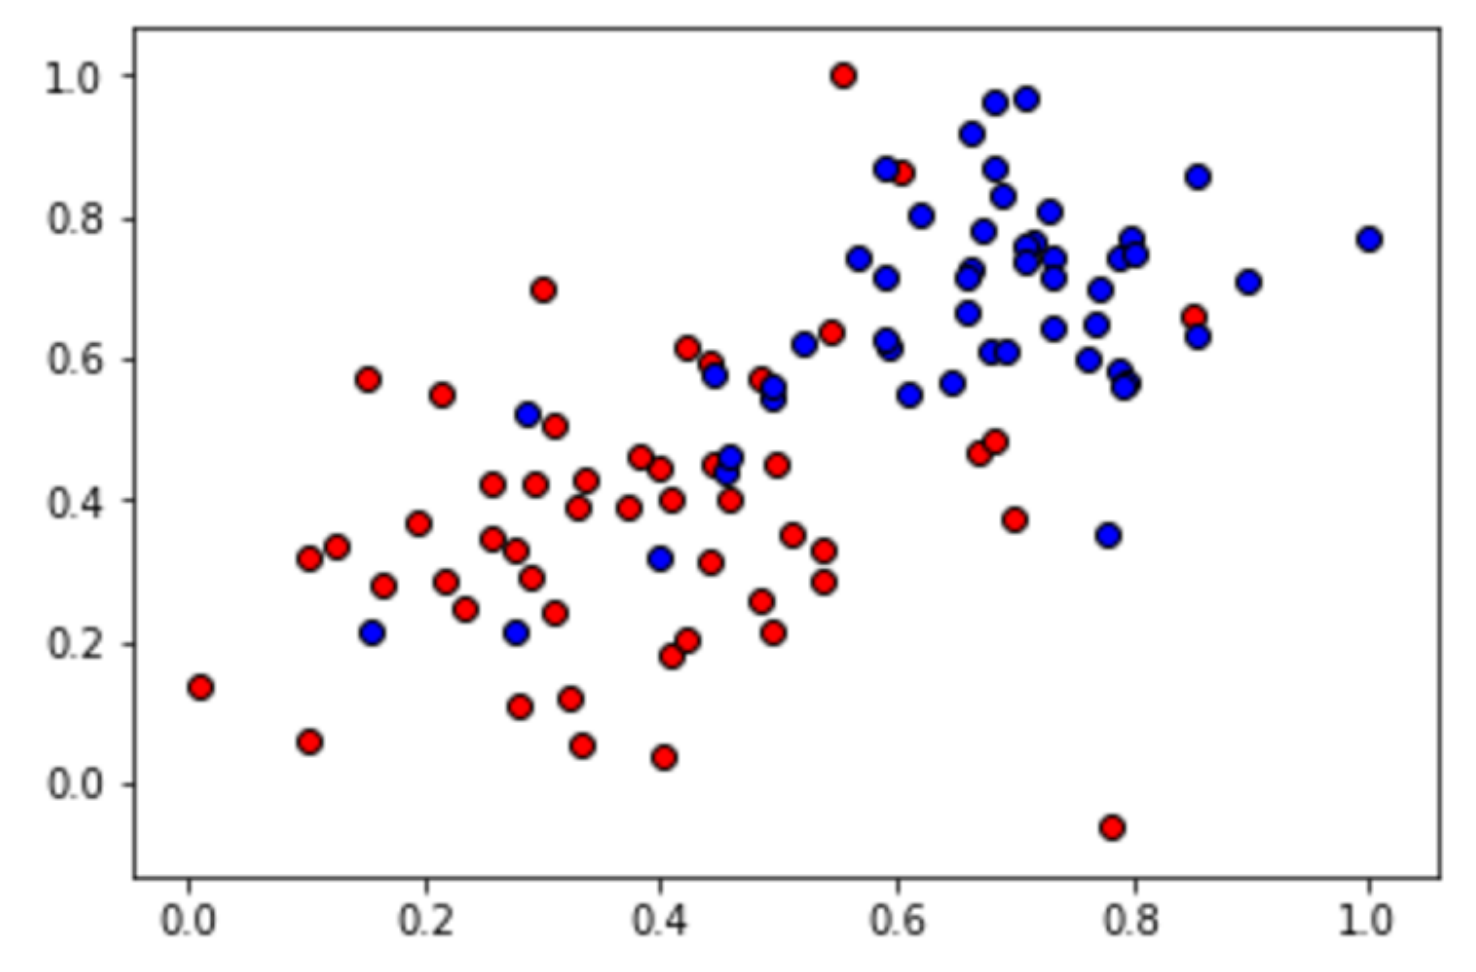 Red and blue data points with some overlap.